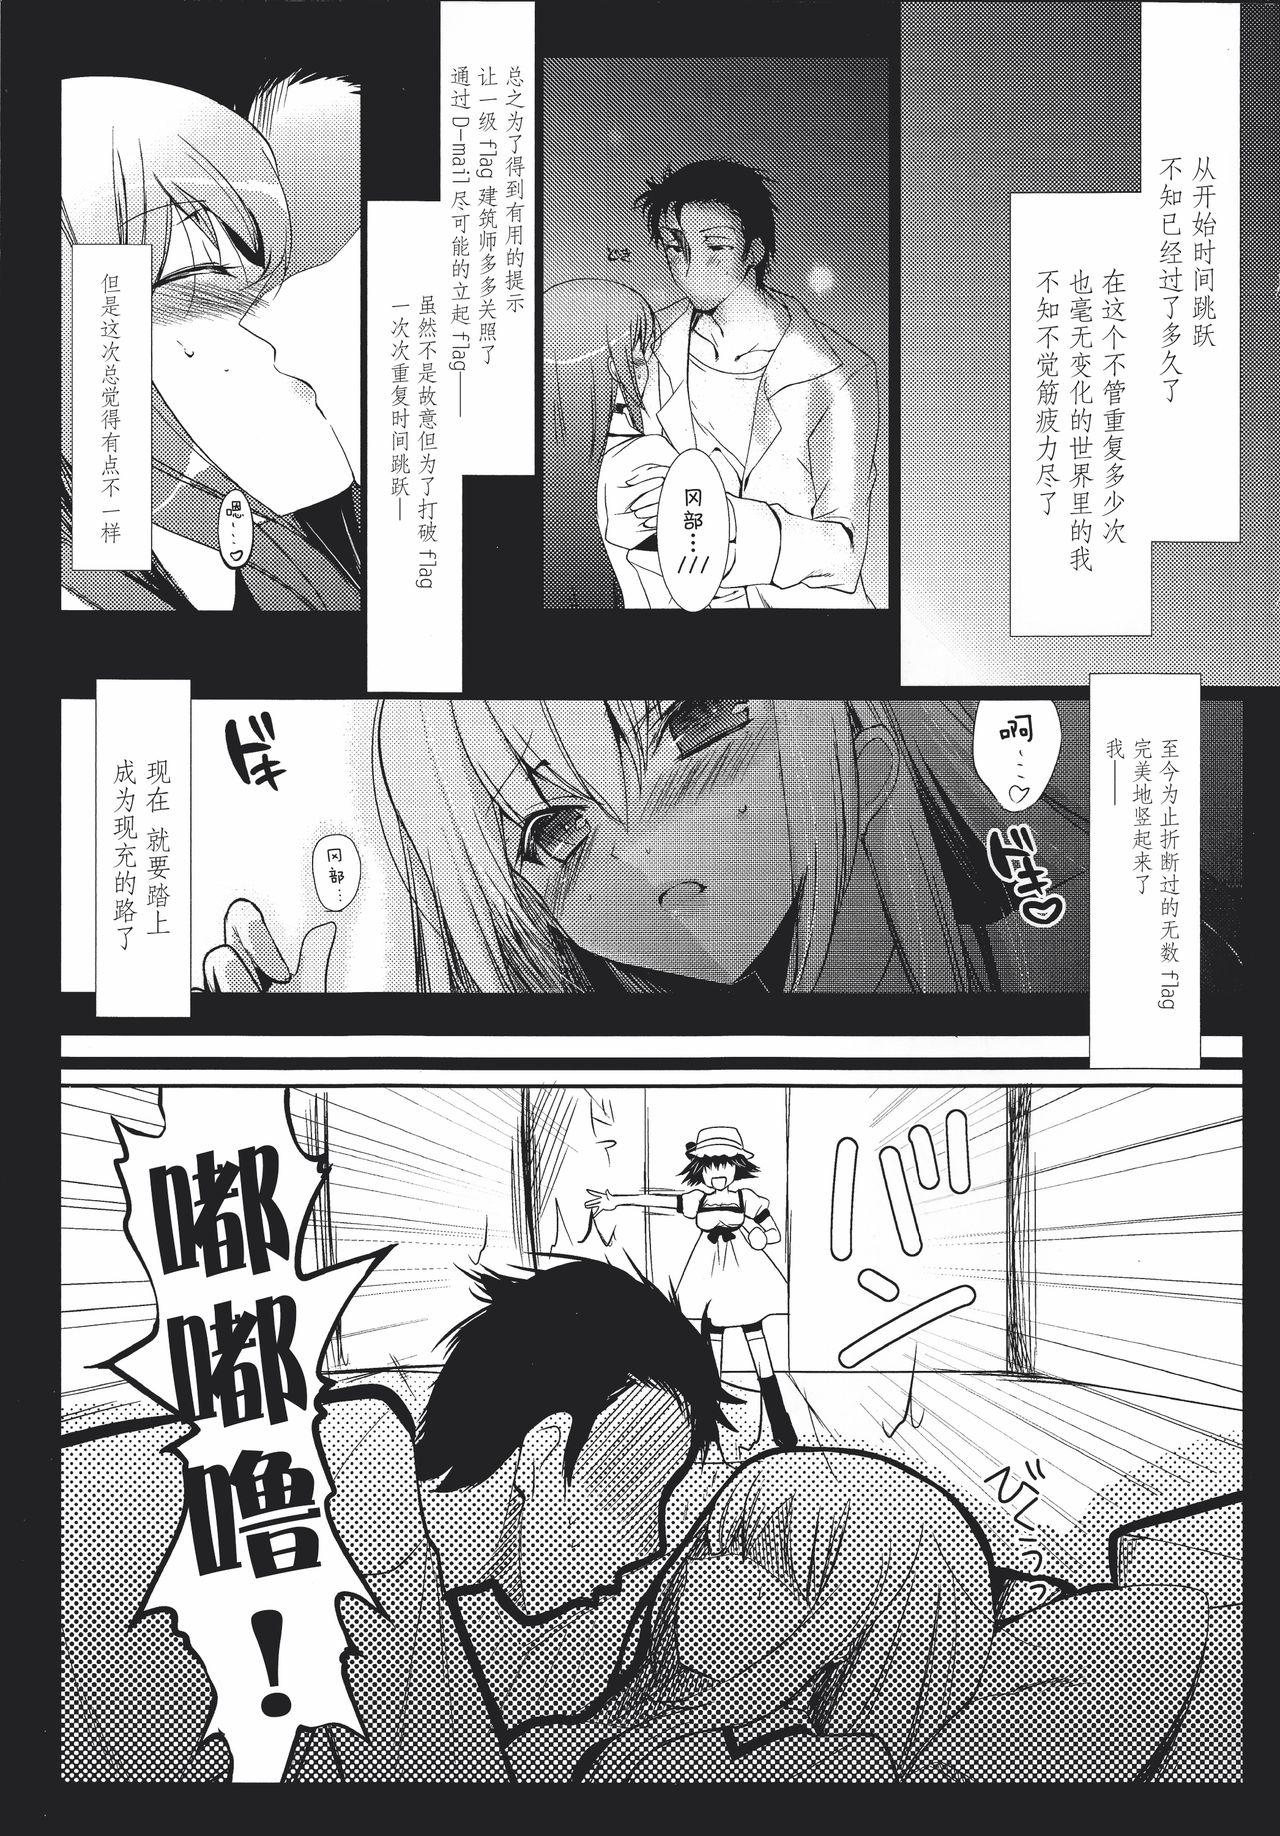 Vadia Ore no Joshu to, Ore no Yome. - Steinsgate Gay College - Page 4